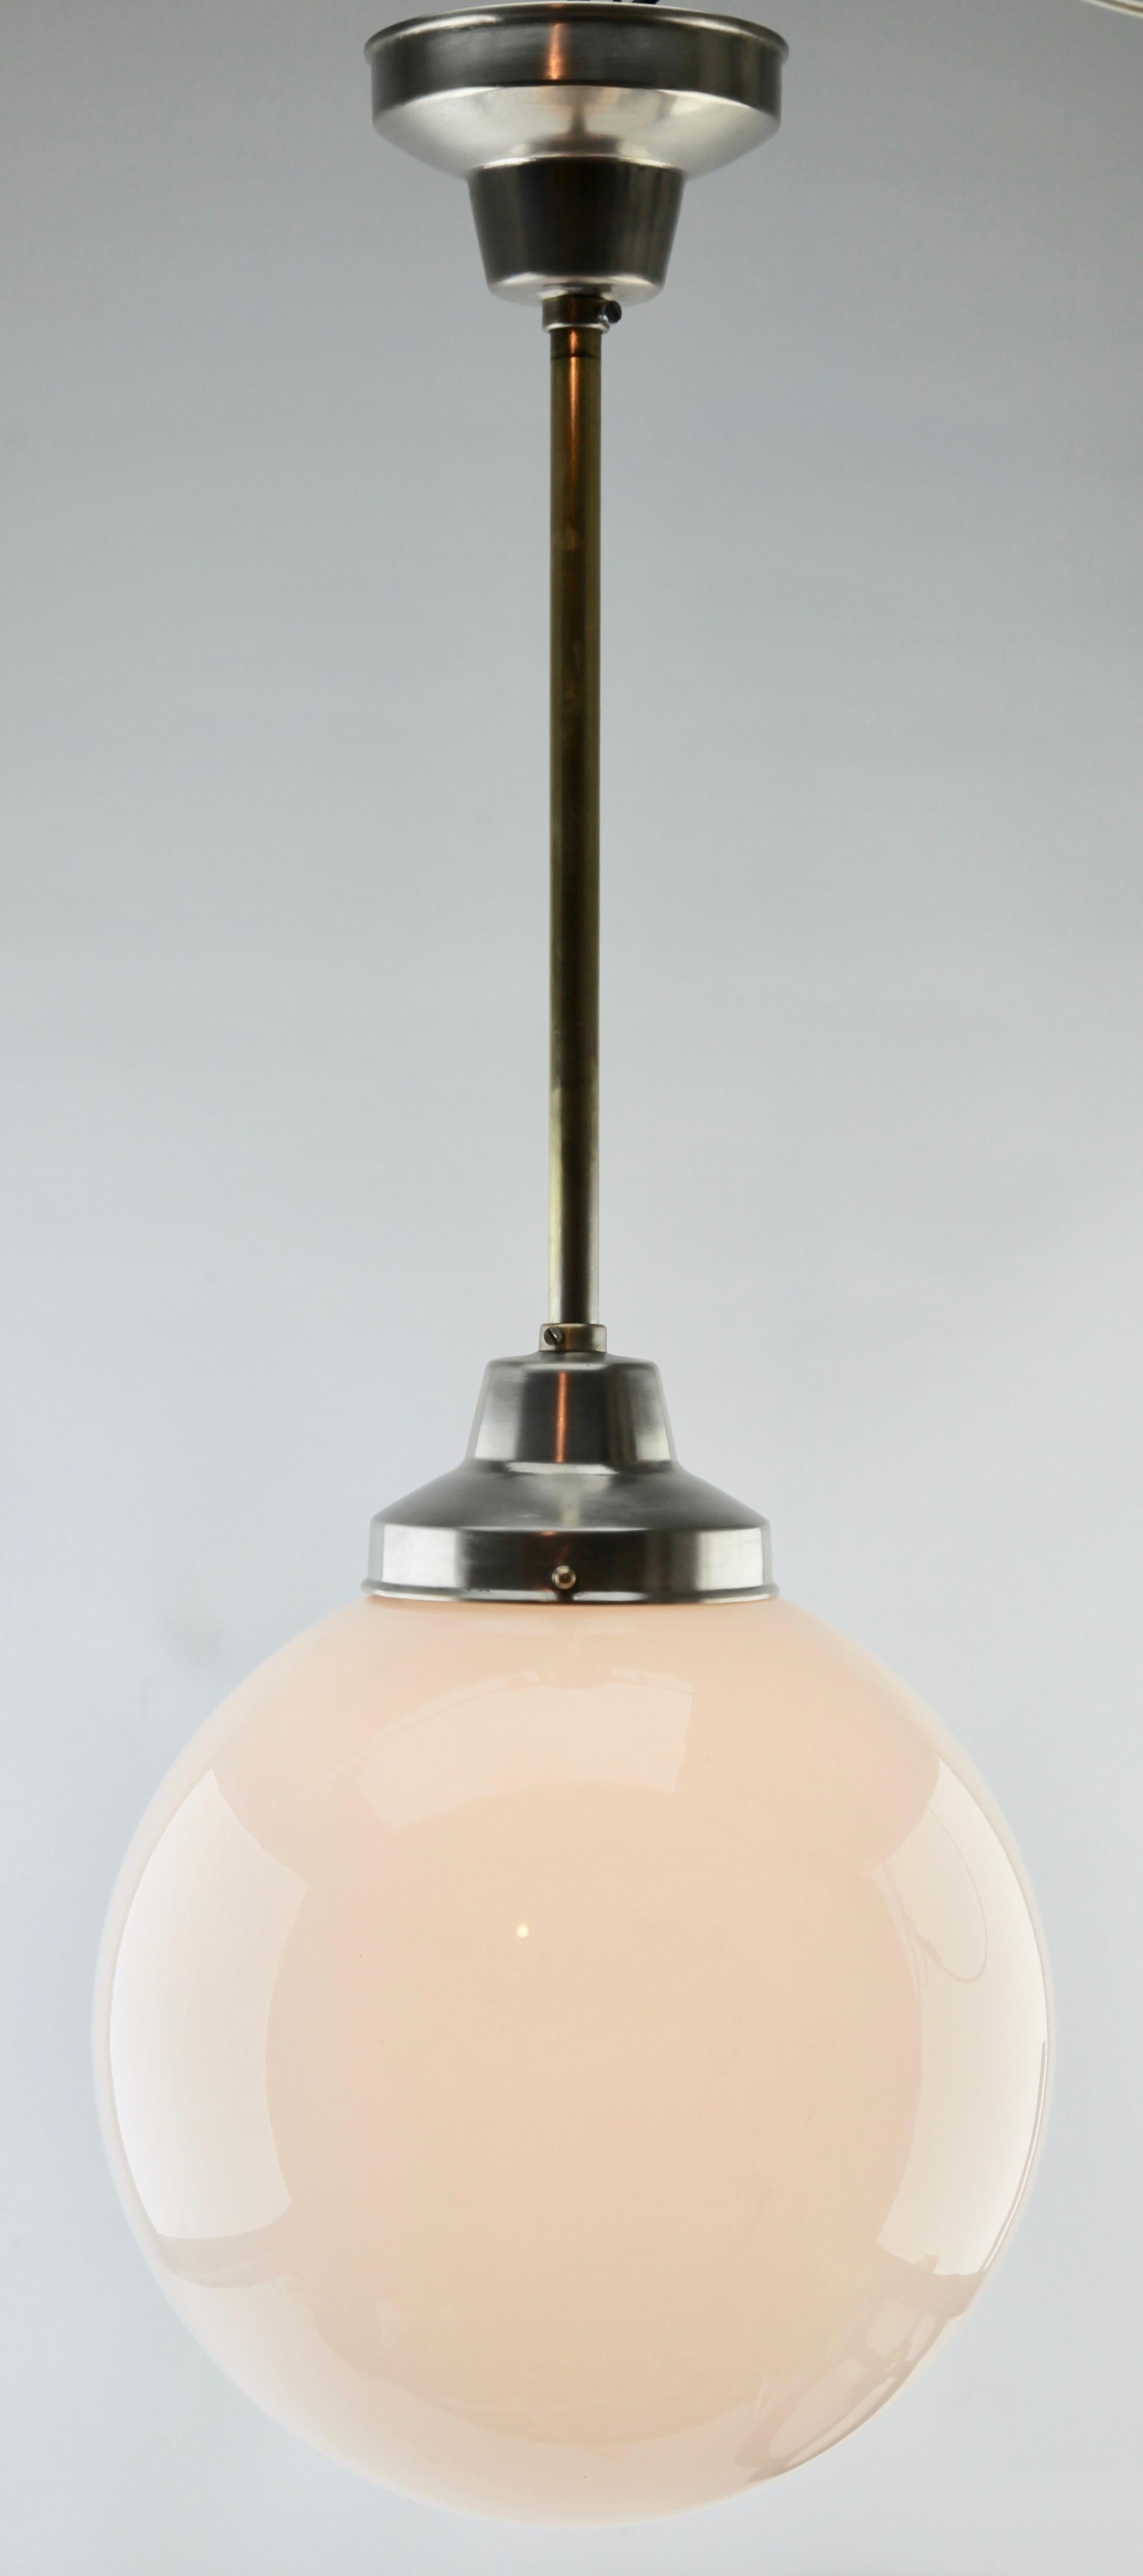 From the range by the Phillips Company, this center-light on a central chromed stem. the lamp has a fitting on a chromed plate and holds a round globular shade of opaline glass.

In good condition and in full working order with standard original